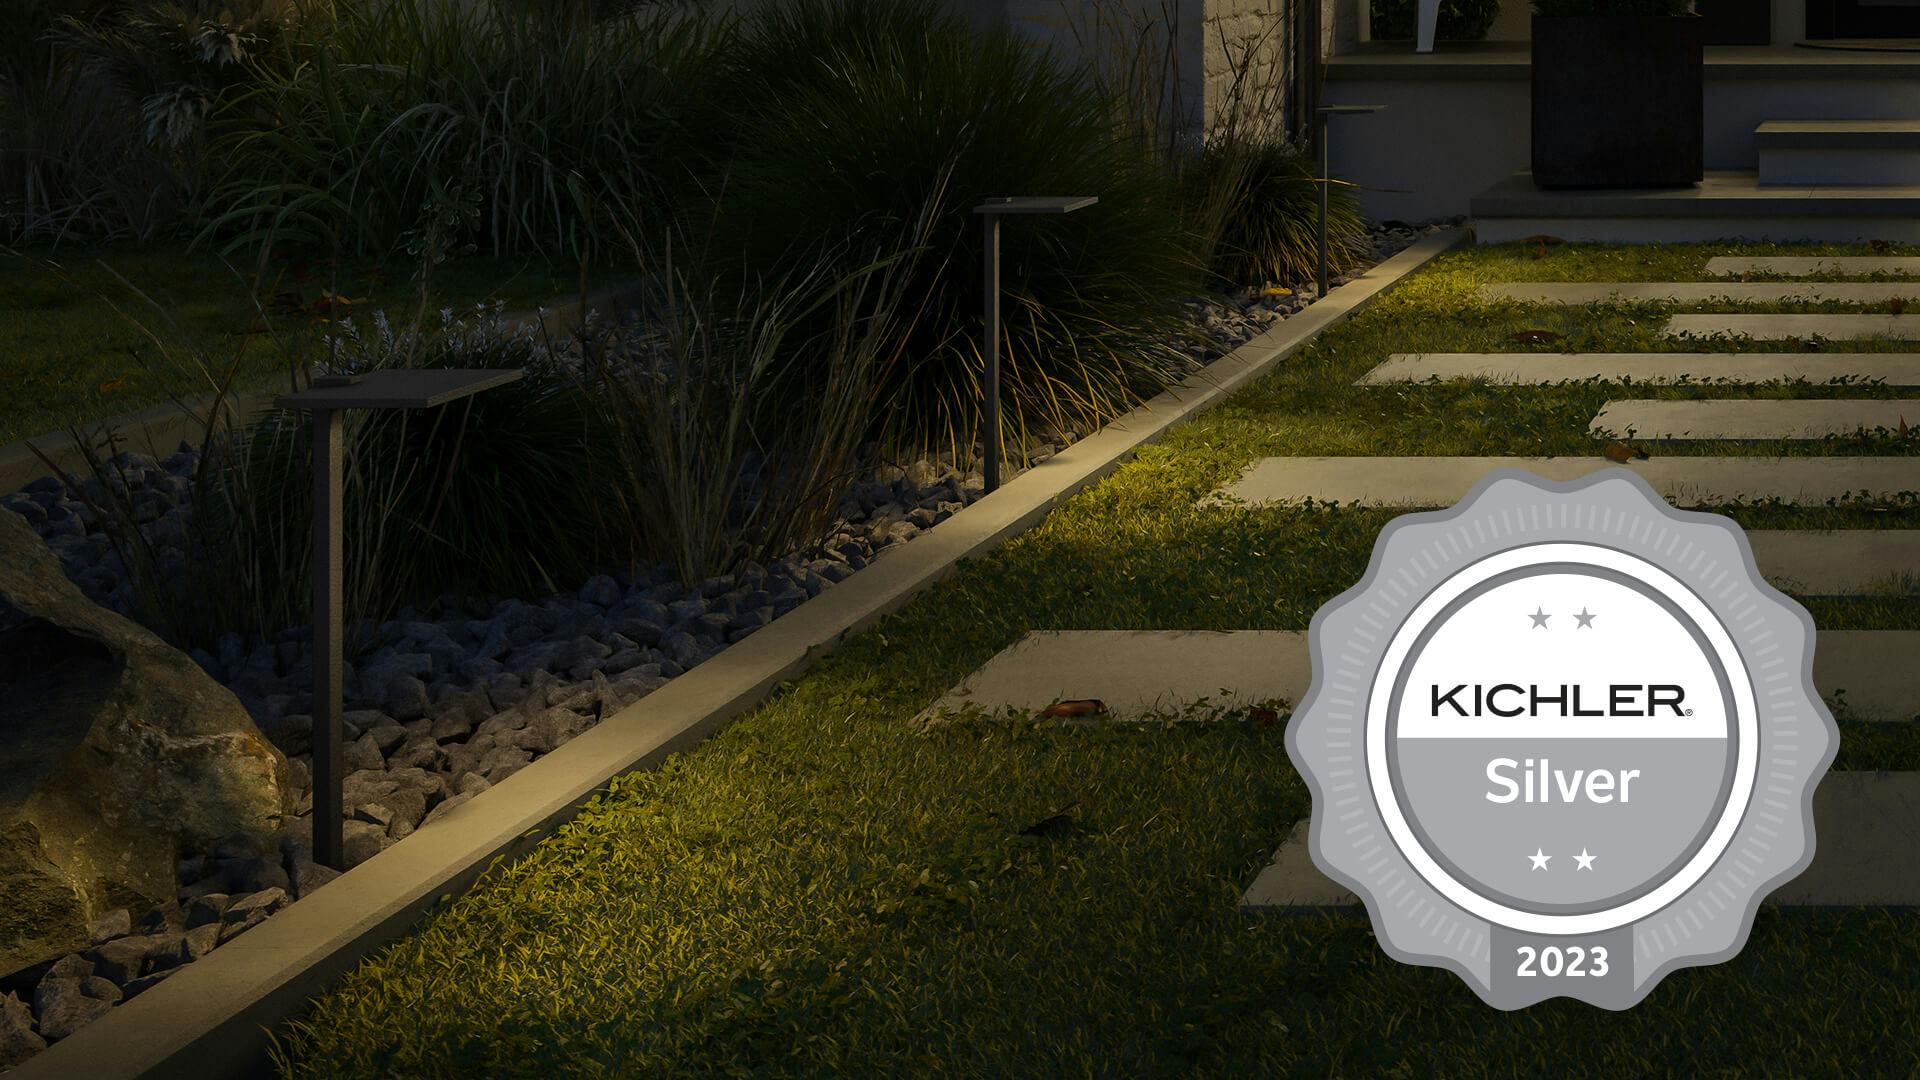 Evening garden pathway featuring a Kichler Silver 2023 medal